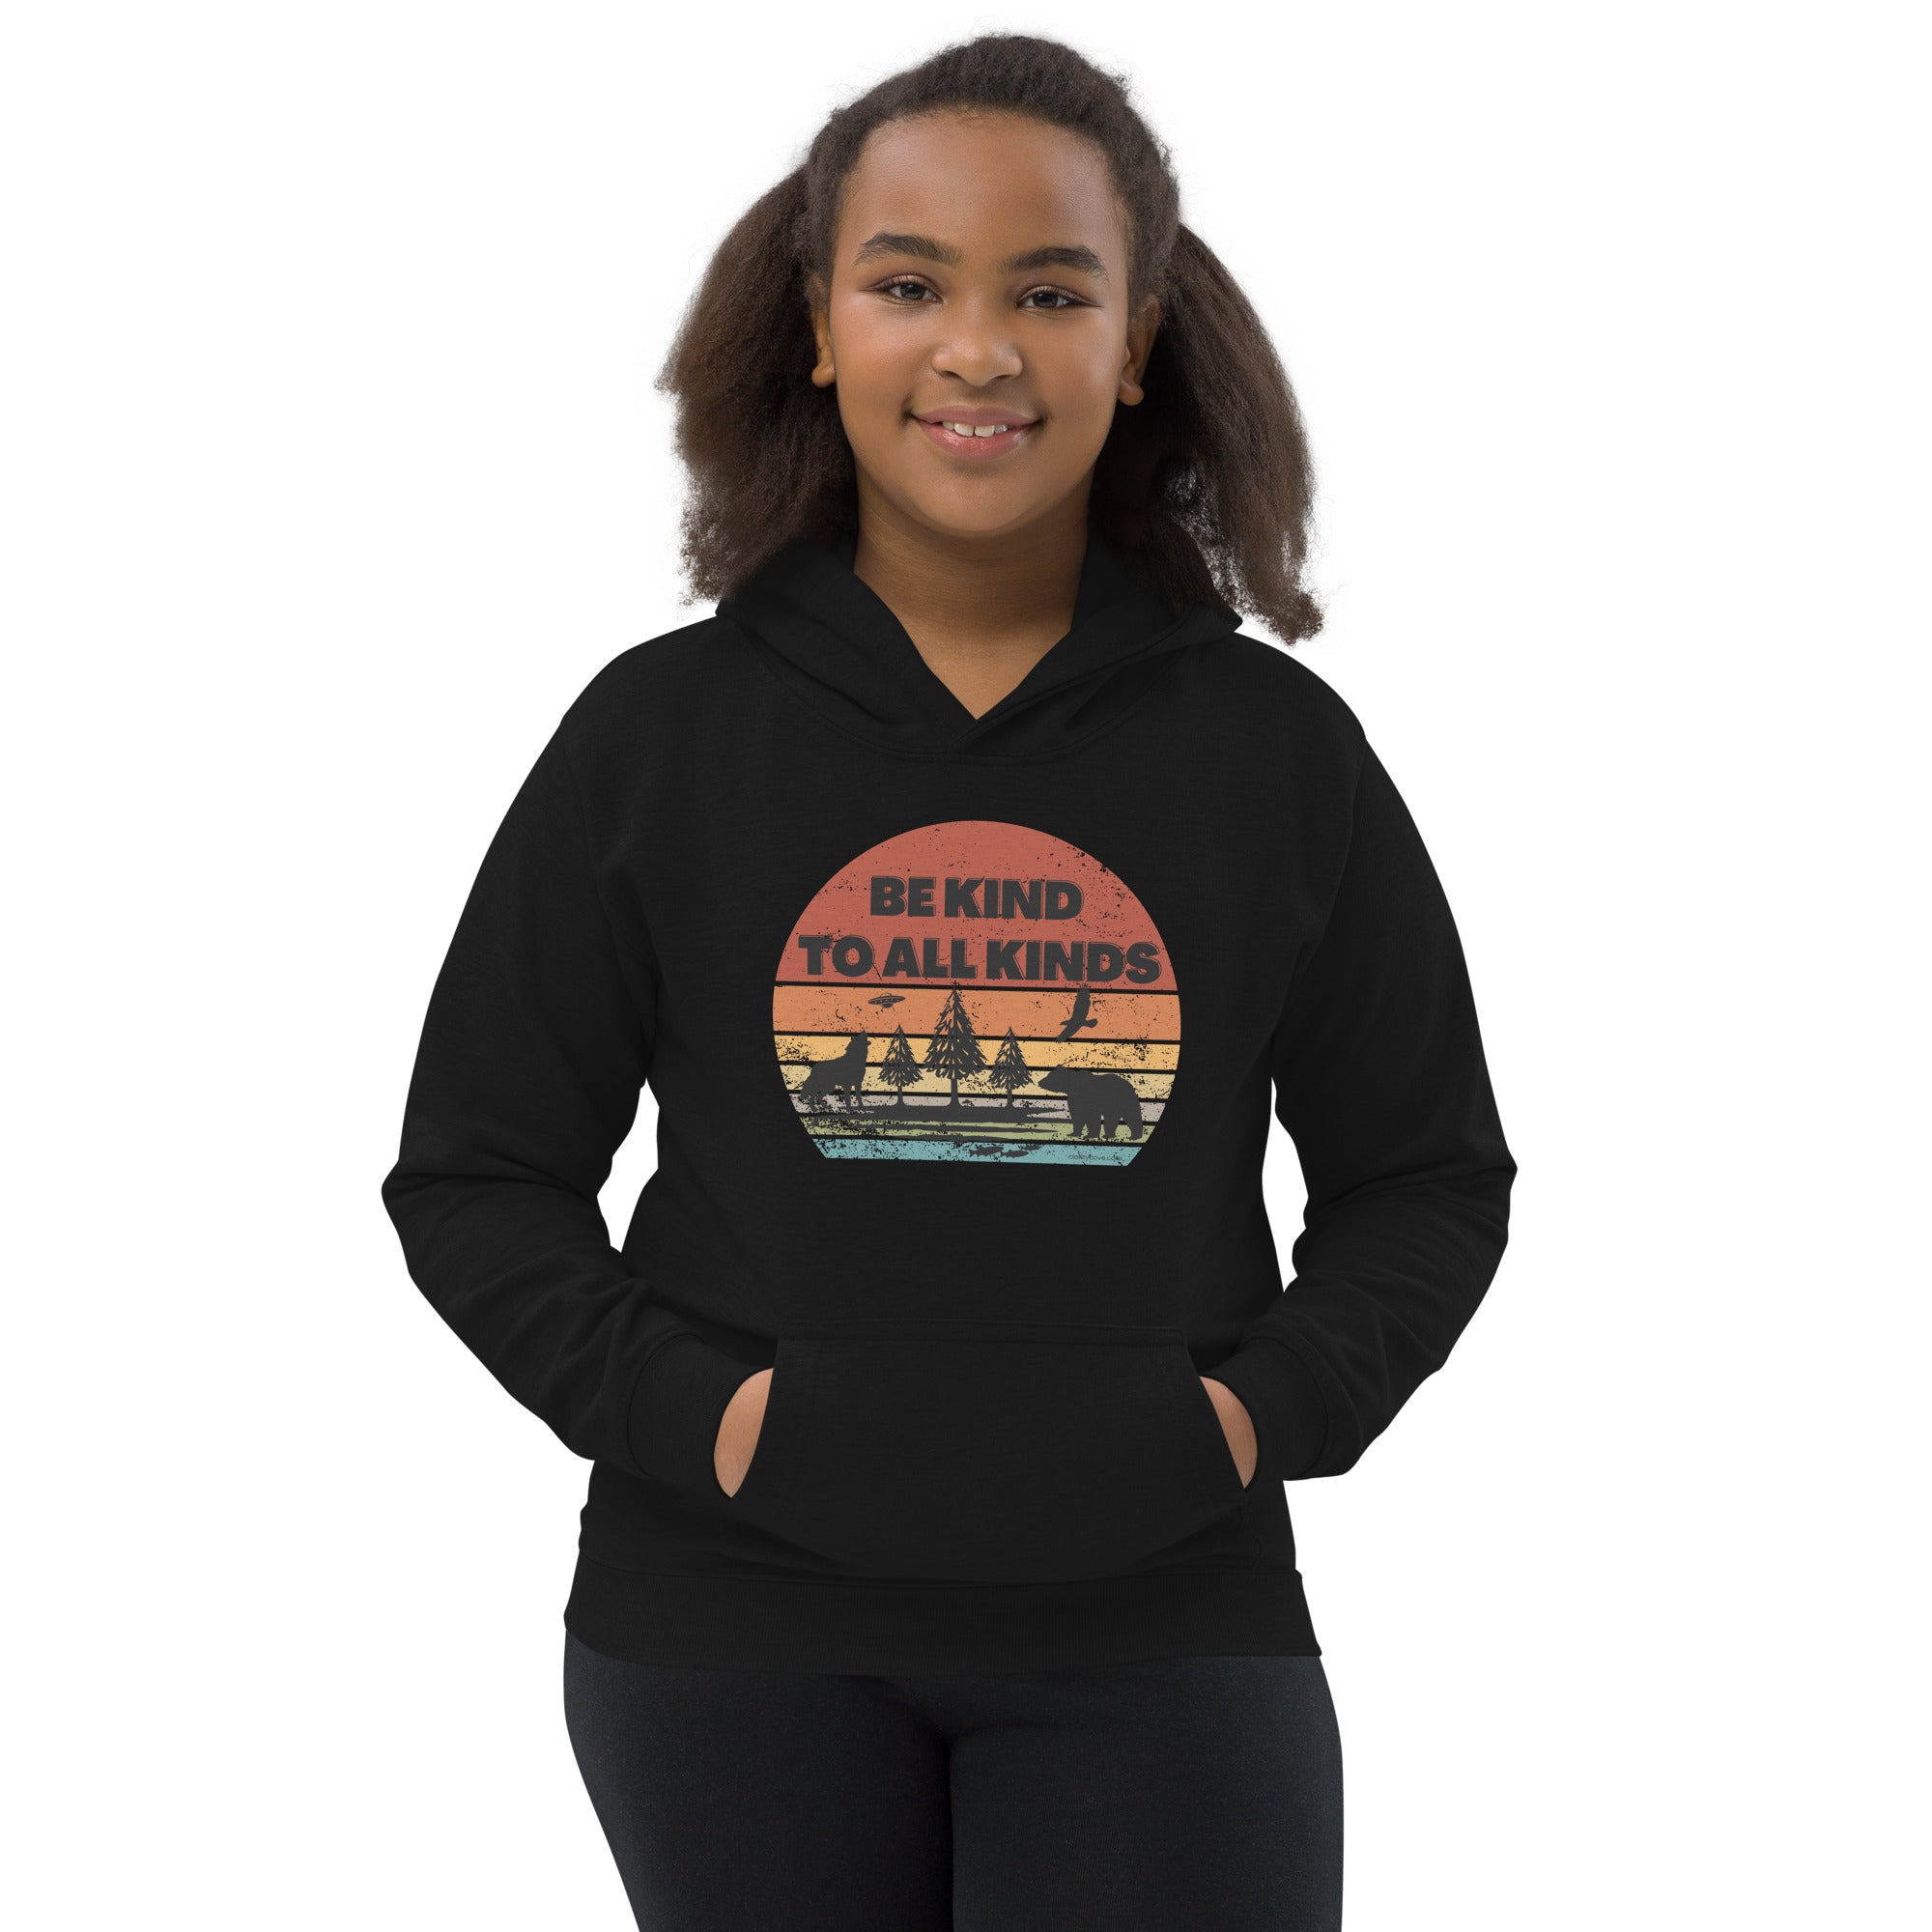 BE KIND TO ALL KINDS Kids Hoodie Sweatshirt (animals, earth, ET UFO) XS-XL (4 colors)